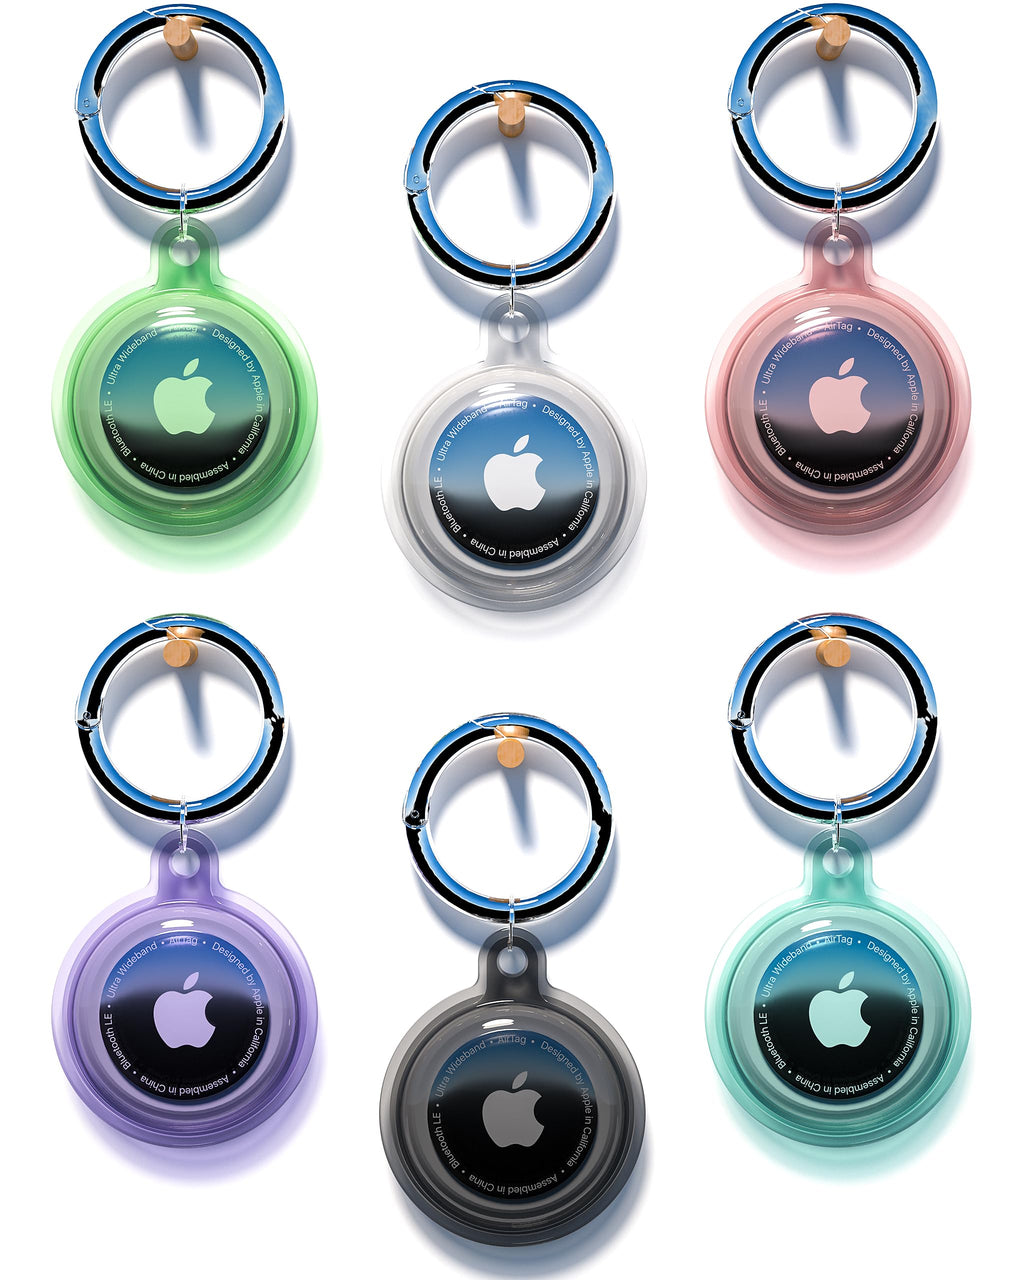  [AUSTRALIA] - 6 Pack Airtag Keychain Waterproof, Air Tag Holder for Apple Airtag GPS Tracker, Soft Full-Body Shockproof Apple Tag Case for Dog Cat Collar, Luggage, Keys (6 Colors) 6 Colors